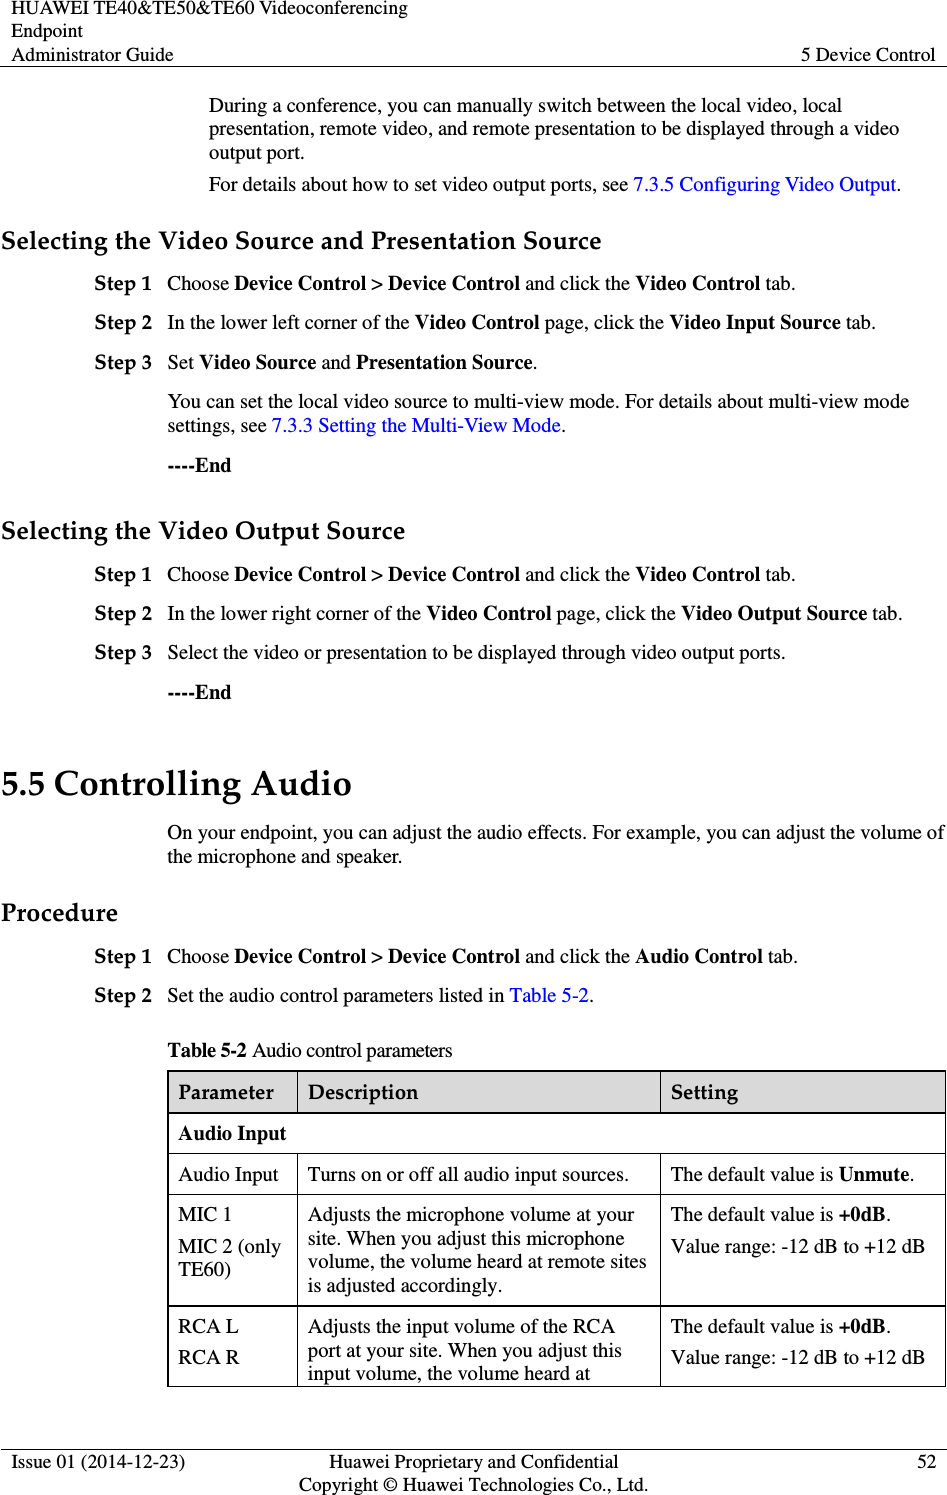 HUAWEI TE40&amp;TE50&amp;TE60 Videoconferencing Endpoint Administrator Guide  5 Device Control  Issue 01 (2014-12-23)  Huawei Proprietary and Confidential                                     Copyright © Huawei Technologies Co., Ltd. 52  During a conference, you can manually switch between the local video, local presentation, remote video, and remote presentation to be displayed through a video output port.   For details about how to set video output ports, see 7.3.5 Configuring Video Output. Selecting the Video Source and Presentation Source Step 1 Choose Device Control &gt; Device Control and click the Video Control tab. Step 2 In the lower left corner of the Video Control page, click the Video Input Source tab. Step 3 Set Video Source and Presentation Source. You can set the local video source to multi-view mode. For details about multi-view mode settings, see 7.3.3 Setting the Multi-View Mode. ----End Selecting the Video Output Source Step 1 Choose Device Control &gt; Device Control and click the Video Control tab. Step 2 In the lower right corner of the Video Control page, click the Video Output Source tab. Step 3 Select the video or presentation to be displayed through video output ports. ----End 5.5 Controlling Audio On your endpoint, you can adjust the audio effects. For example, you can adjust the volume of the microphone and speaker. Procedure Step 1 Choose Device Control &gt; Device Control and click the Audio Control tab. Step 2 Set the audio control parameters listed in Table 5-2. Table 5-2 Audio control parameters Parameter  Description  Setting Audio Input Audio Input  Turns on or off all audio input sources.  The default value is Unmute.   MIC 1 MIC 2 (only TE60) Adjusts the microphone volume at your site. When you adjust this microphone volume, the volume heard at remote sites is adjusted accordingly. The default value is +0dB. Value range: -12 dB to +12 dB RCA L RCA R Adjusts the input volume of the RCA port at your site. When you adjust this input volume, the volume heard at The default value is +0dB. Value range: -12 dB to +12 dB 